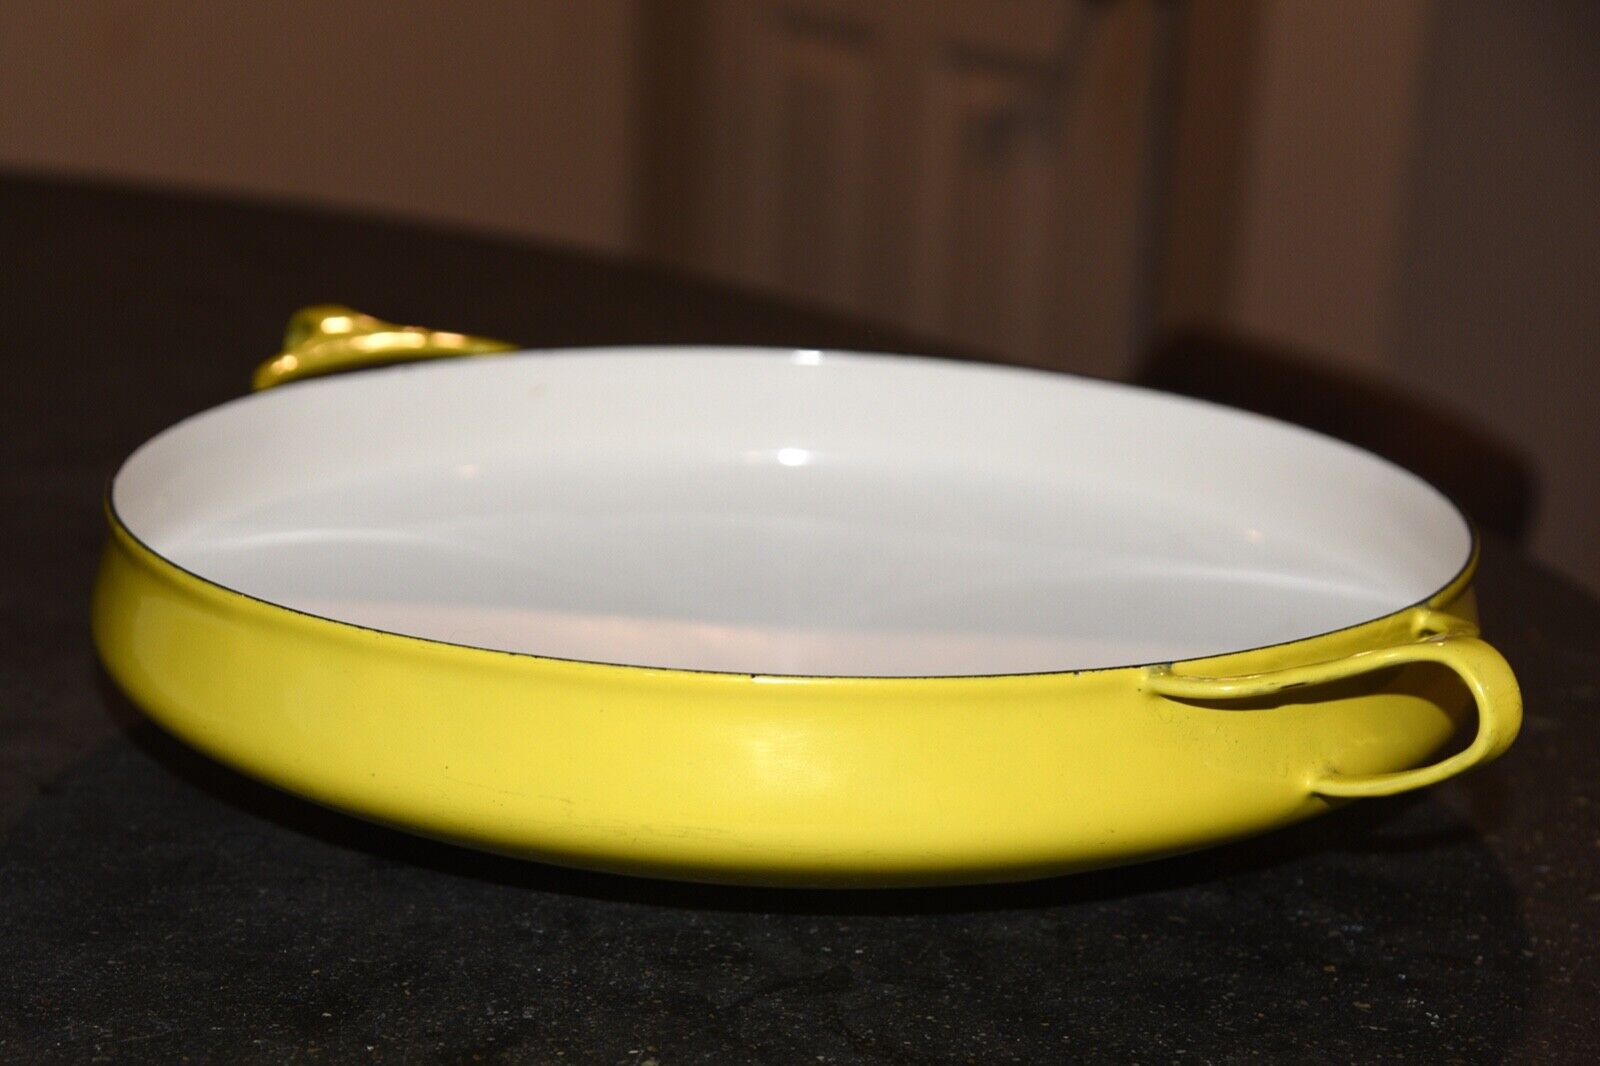 VERY RARE, Early Dansk Kobenstyle Paella Pan in highly collectible